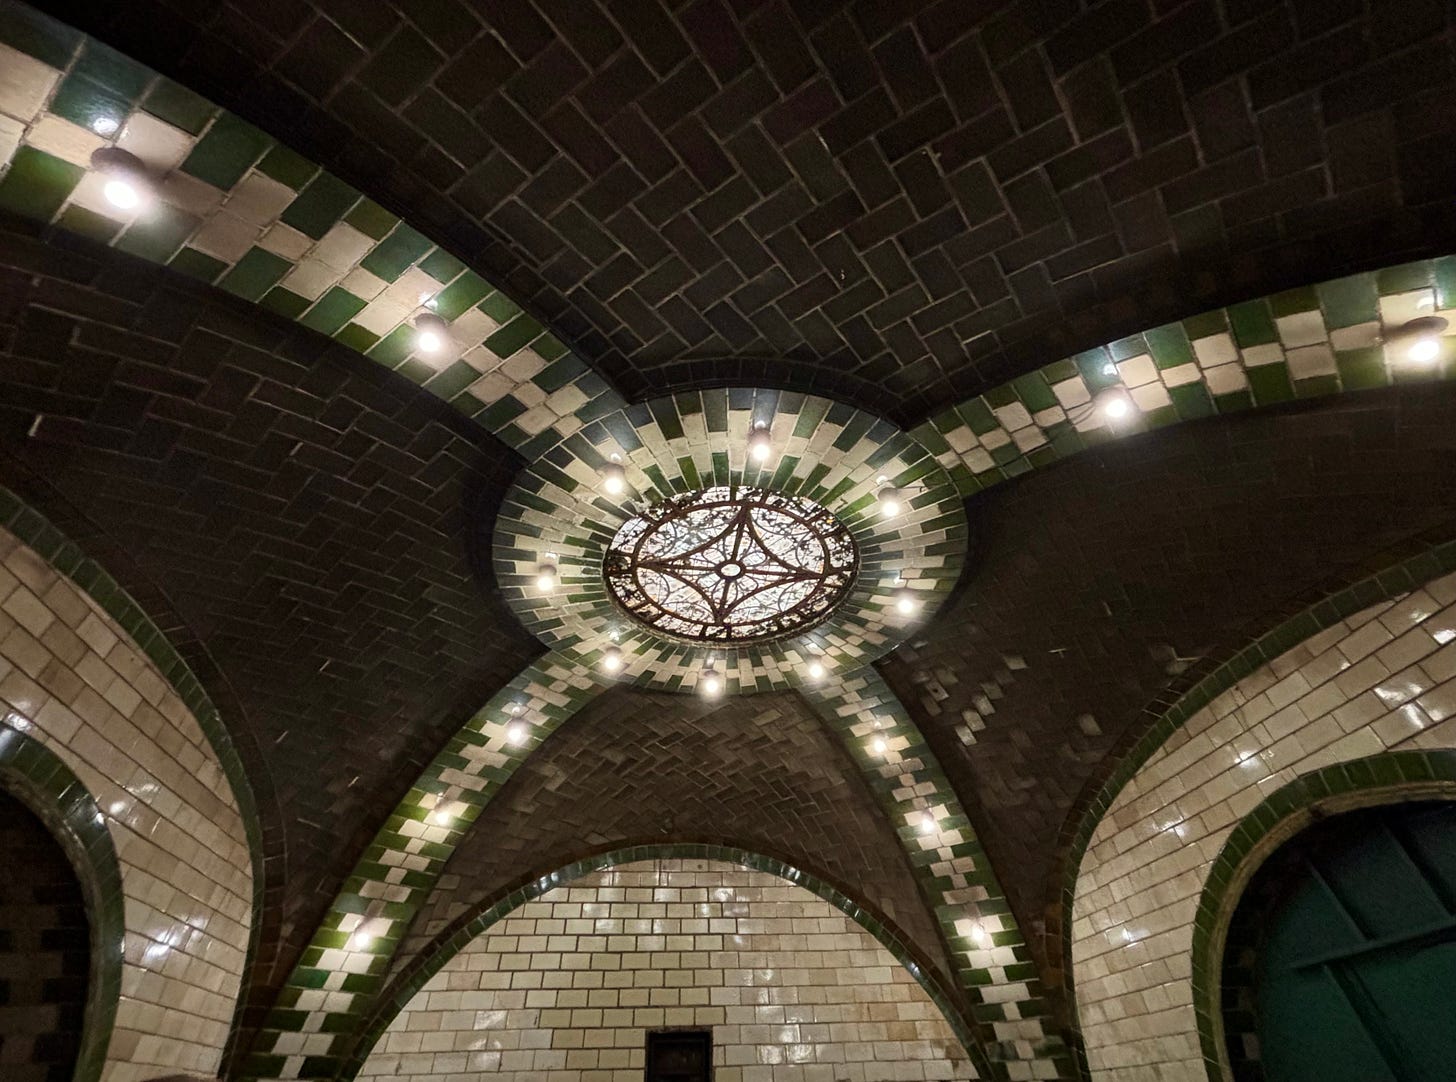 The high ceiling in the entrance of the old station. Green and white tiled arches cut across dark interlocking tiles. In the center is a decorate circular abstract pattern.